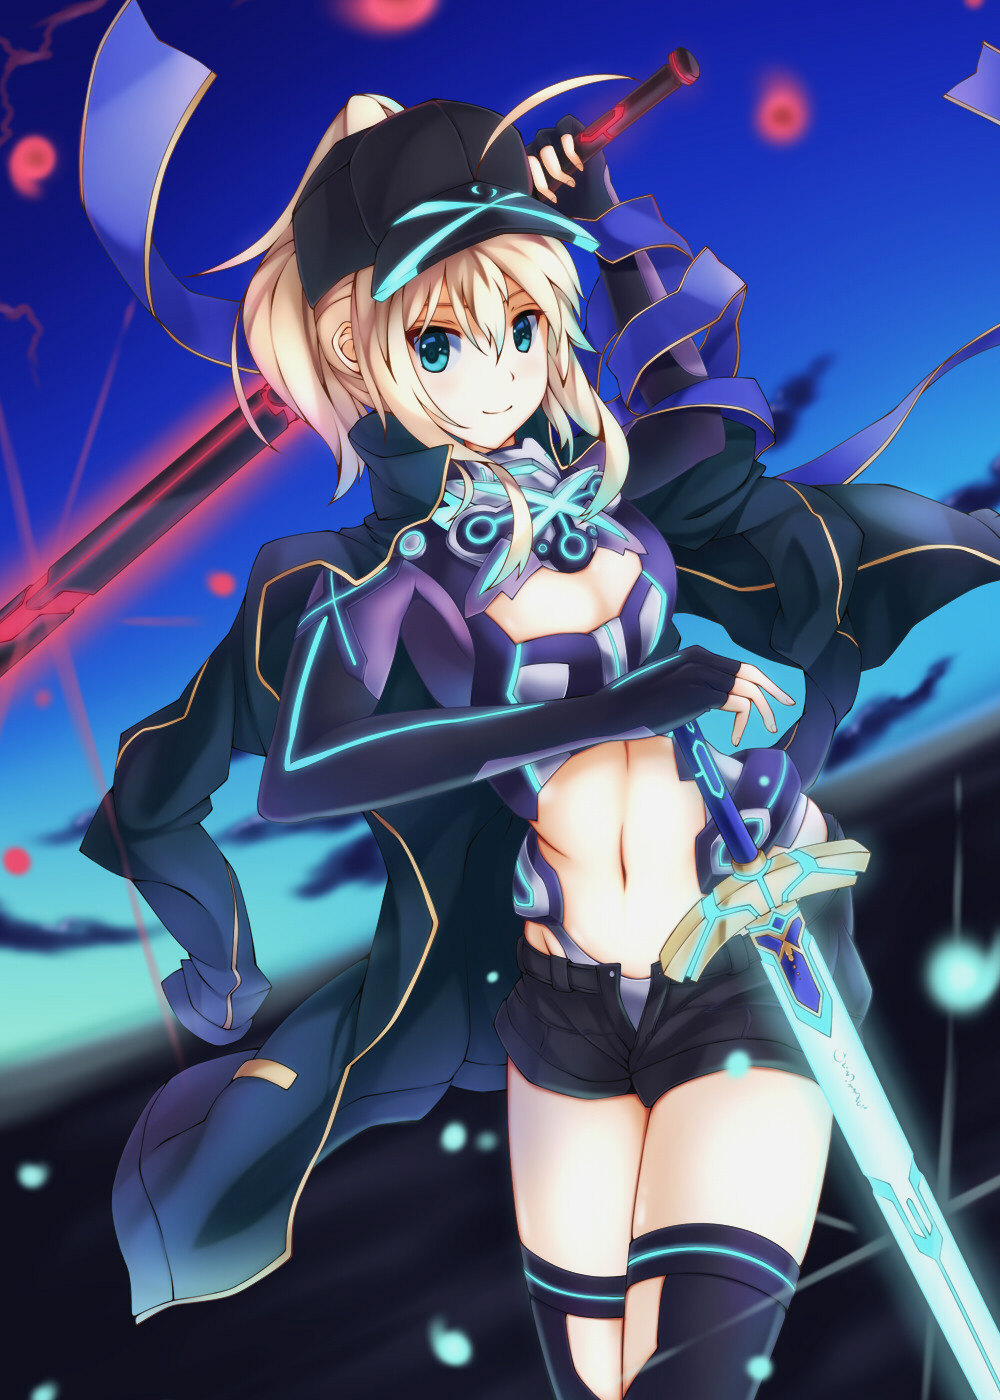 1girl aqua_eyes black_legwear black_shorts blonde_hair dual_wielding excalibur fate/grand_order fate_(series) hat heroine_x highres holding_sword holding_weapon long_hair looking_at_viewer navel open_clothes open_shorts panties saber shorts smile solo sword thigh-highs underwear weapon